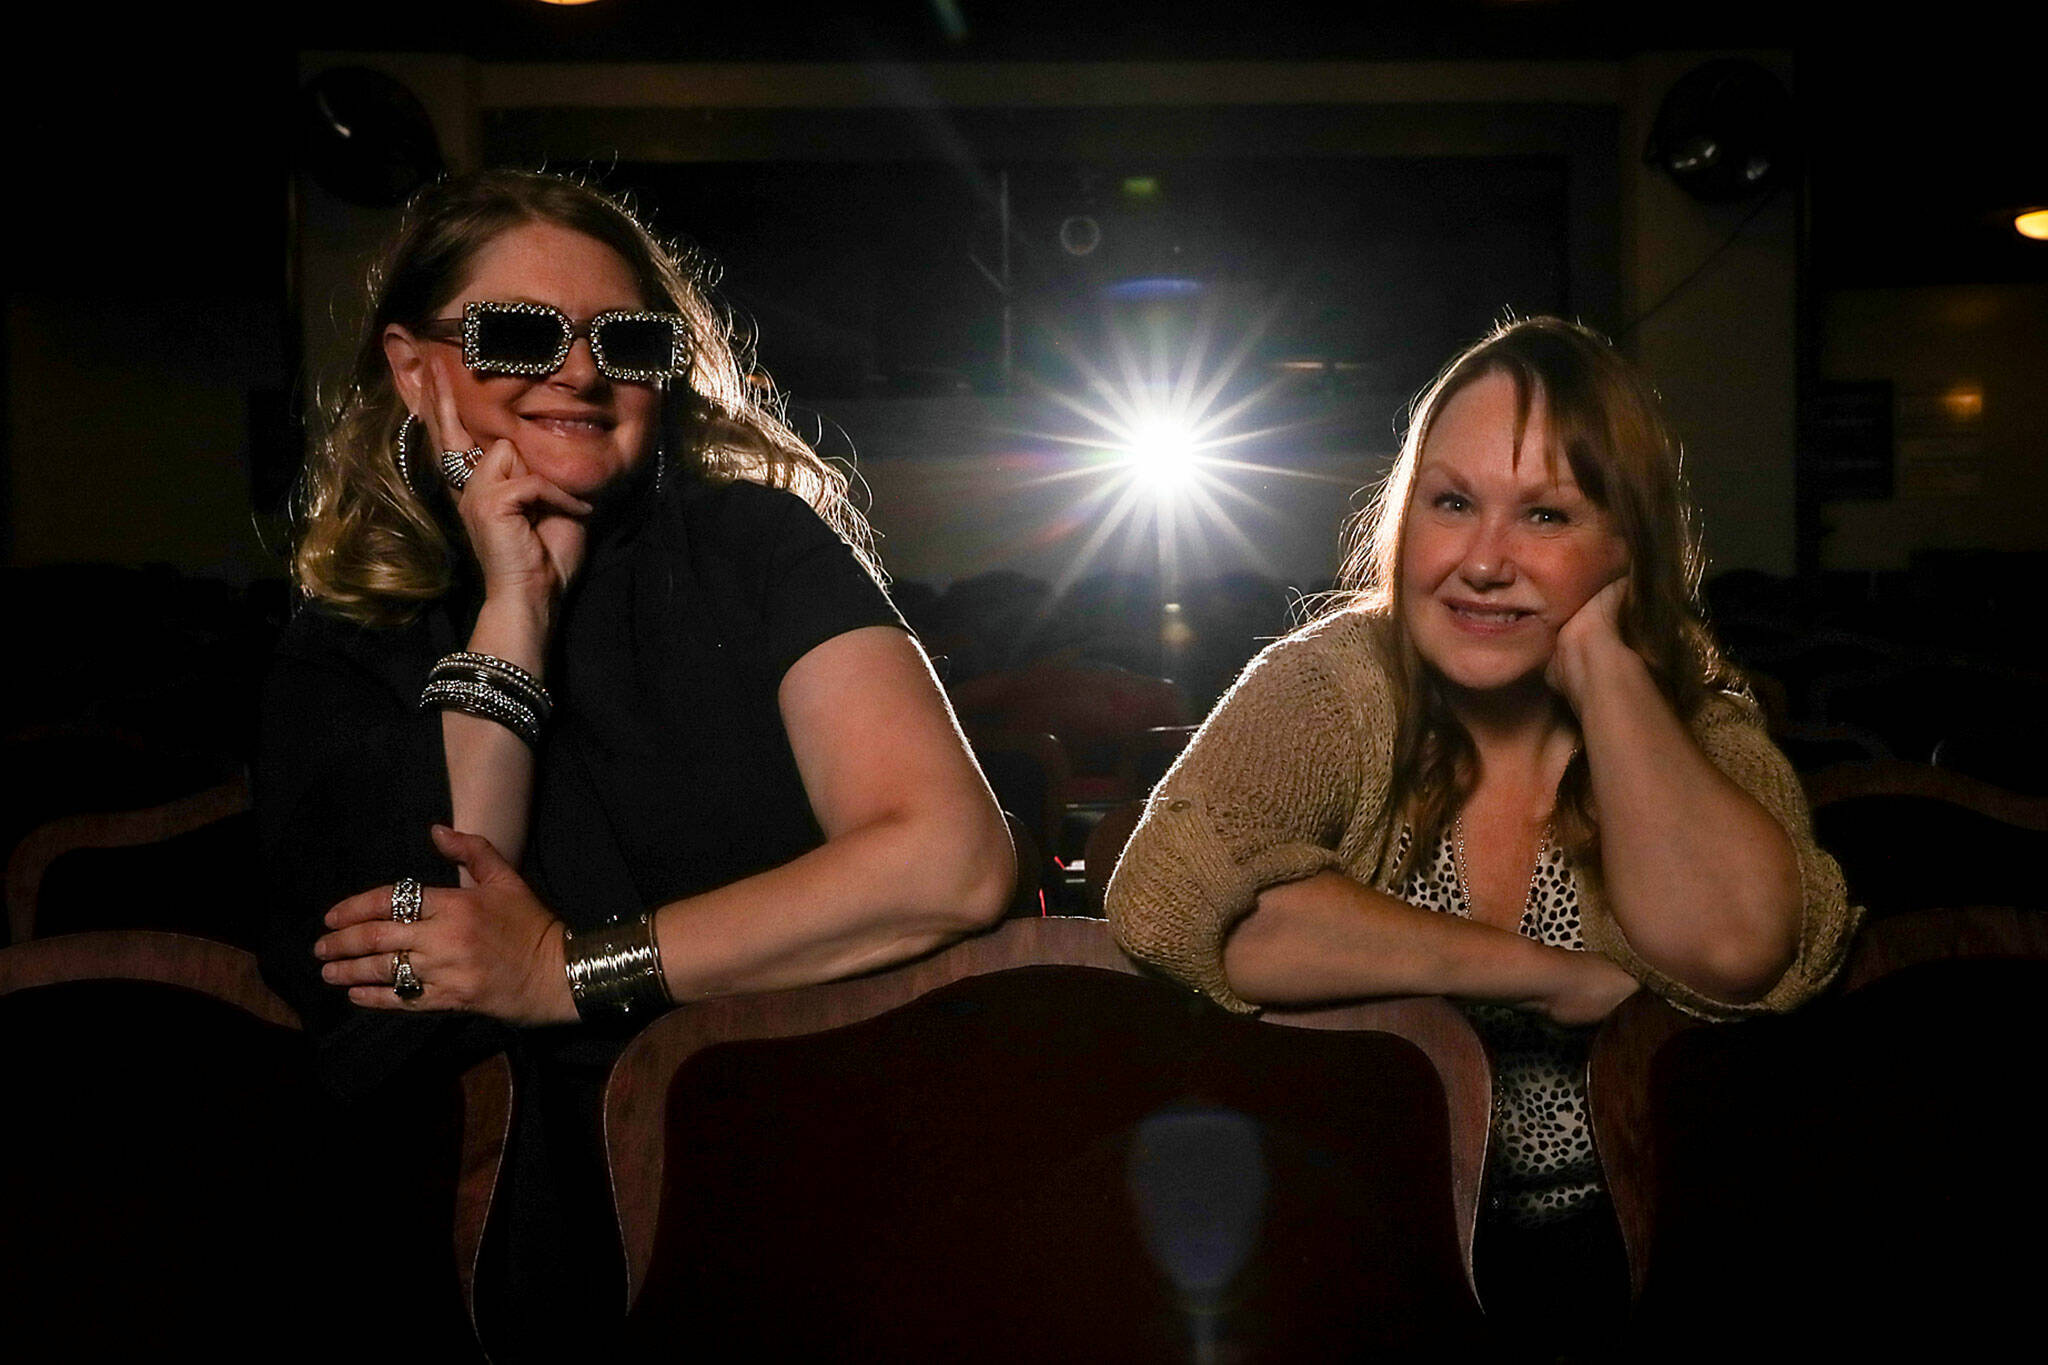 Kristina Morris and Mindy Woods are organizing a benefit concert for housing and homelessness service organizations at the Historic Everett Theatre on be September 18, 2022. Photographed in Everett, Washington on August 2, 2022. (Kevin Clark / The Herald)